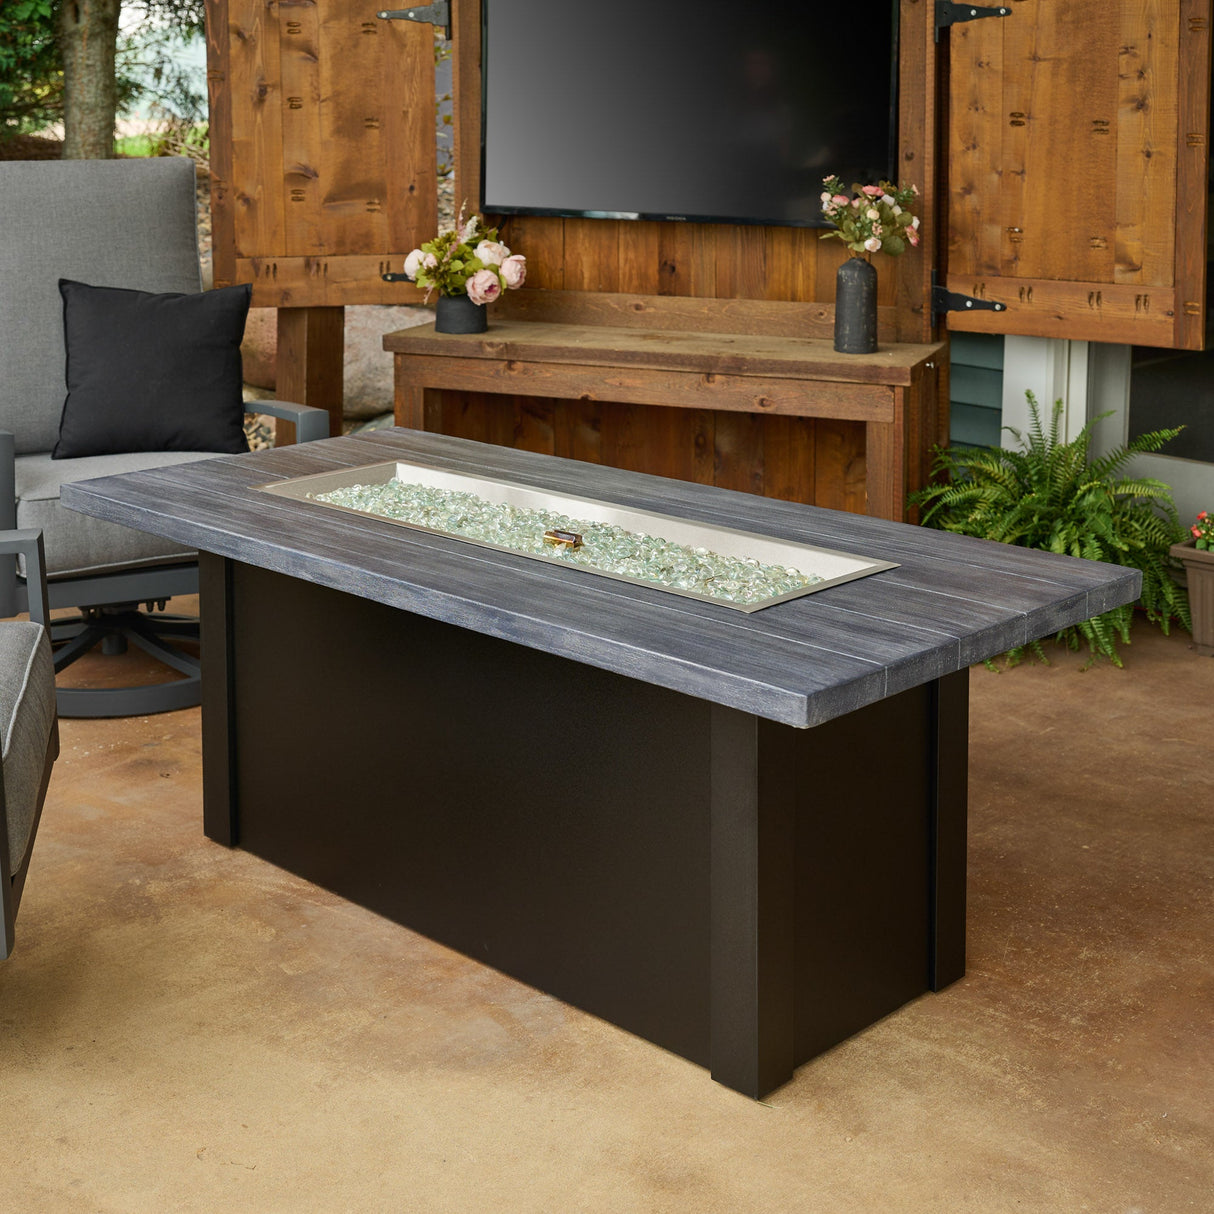 The Havenwood Linear Gas Fire Pit Table with a Carbon Grey top and Luverne Black base without a cover